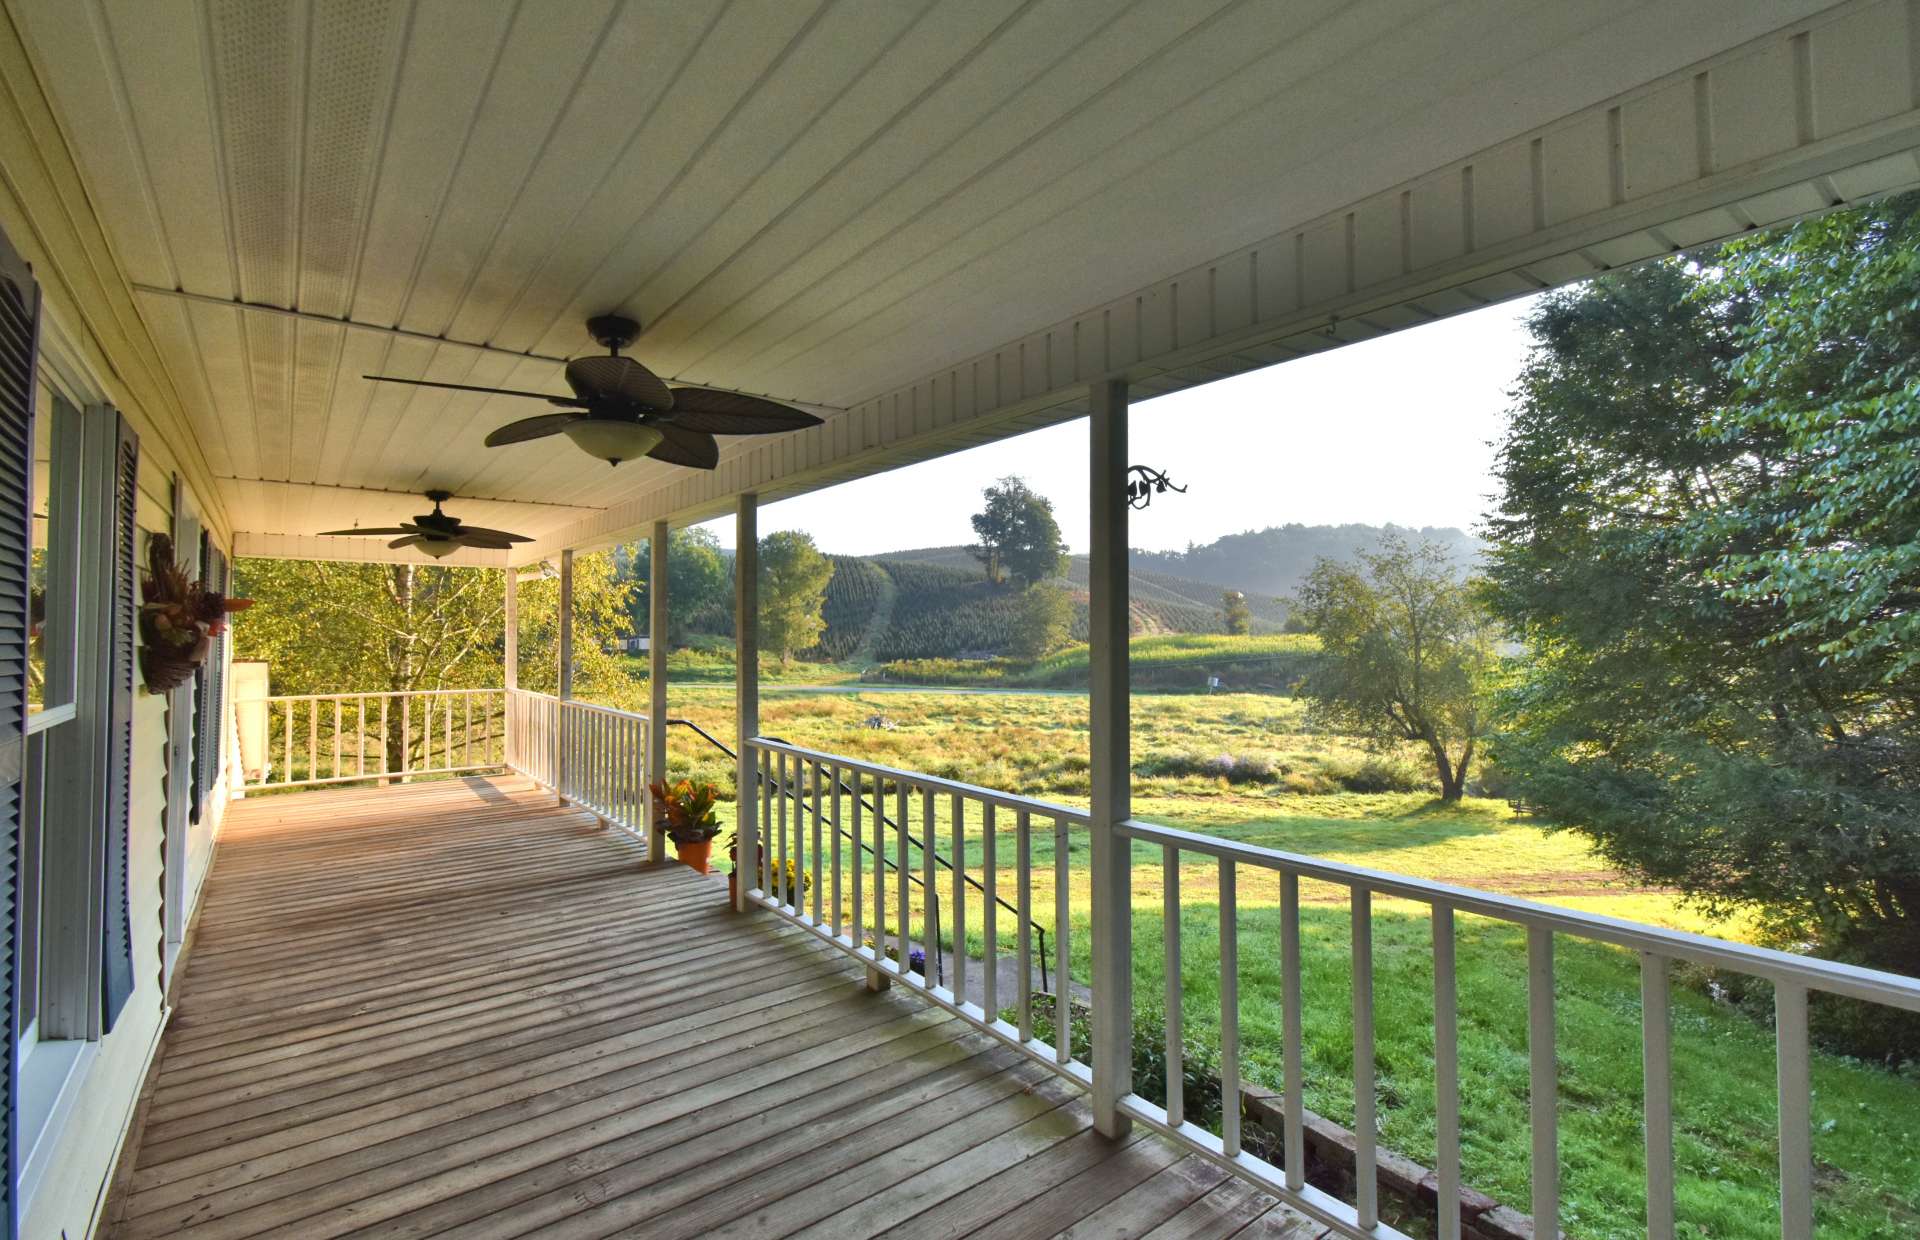 This home has two covered porches spanning the length of the home.